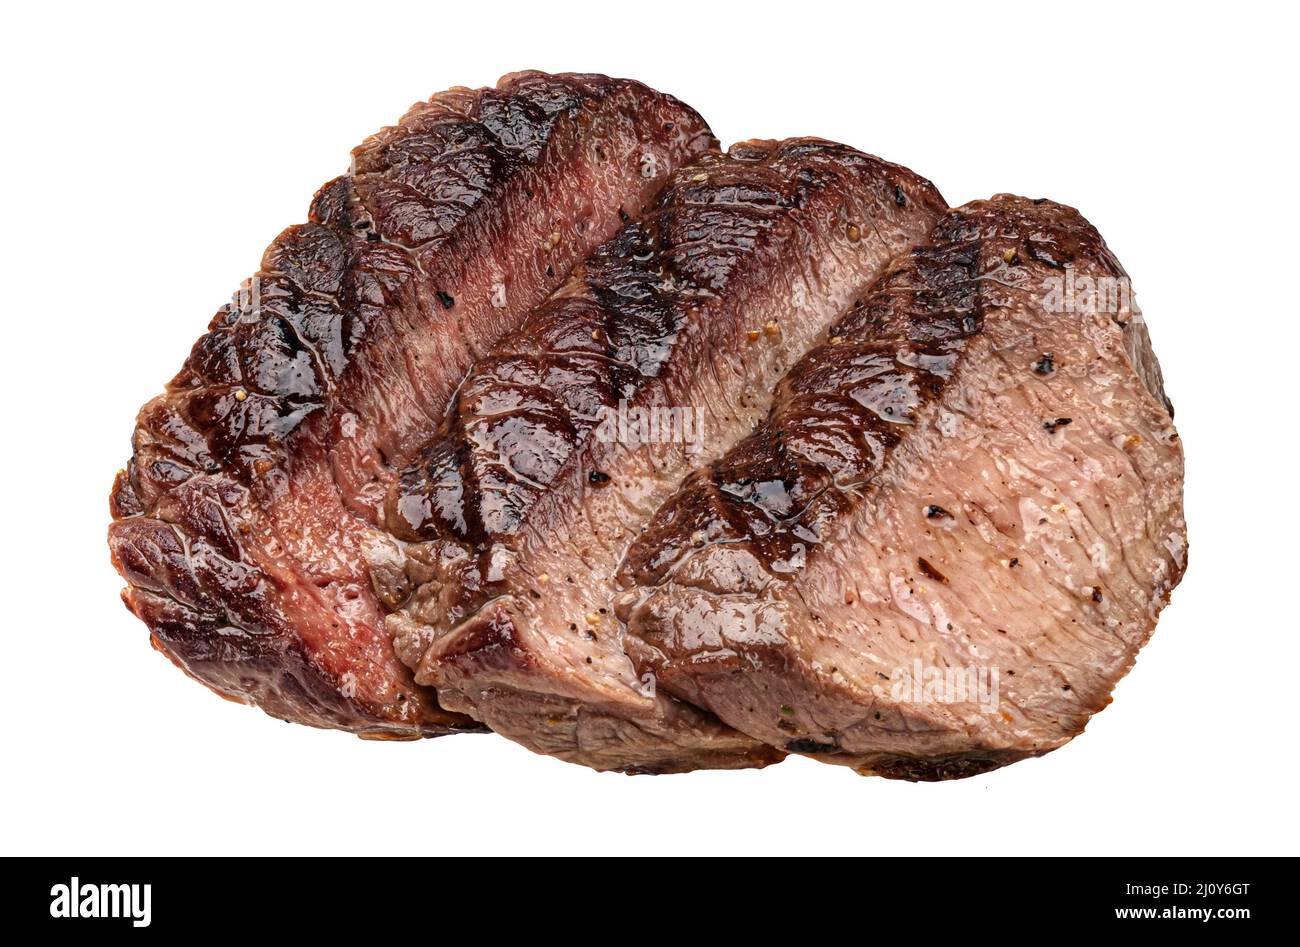 Sliced beef steak isolated on white background Stock Photo